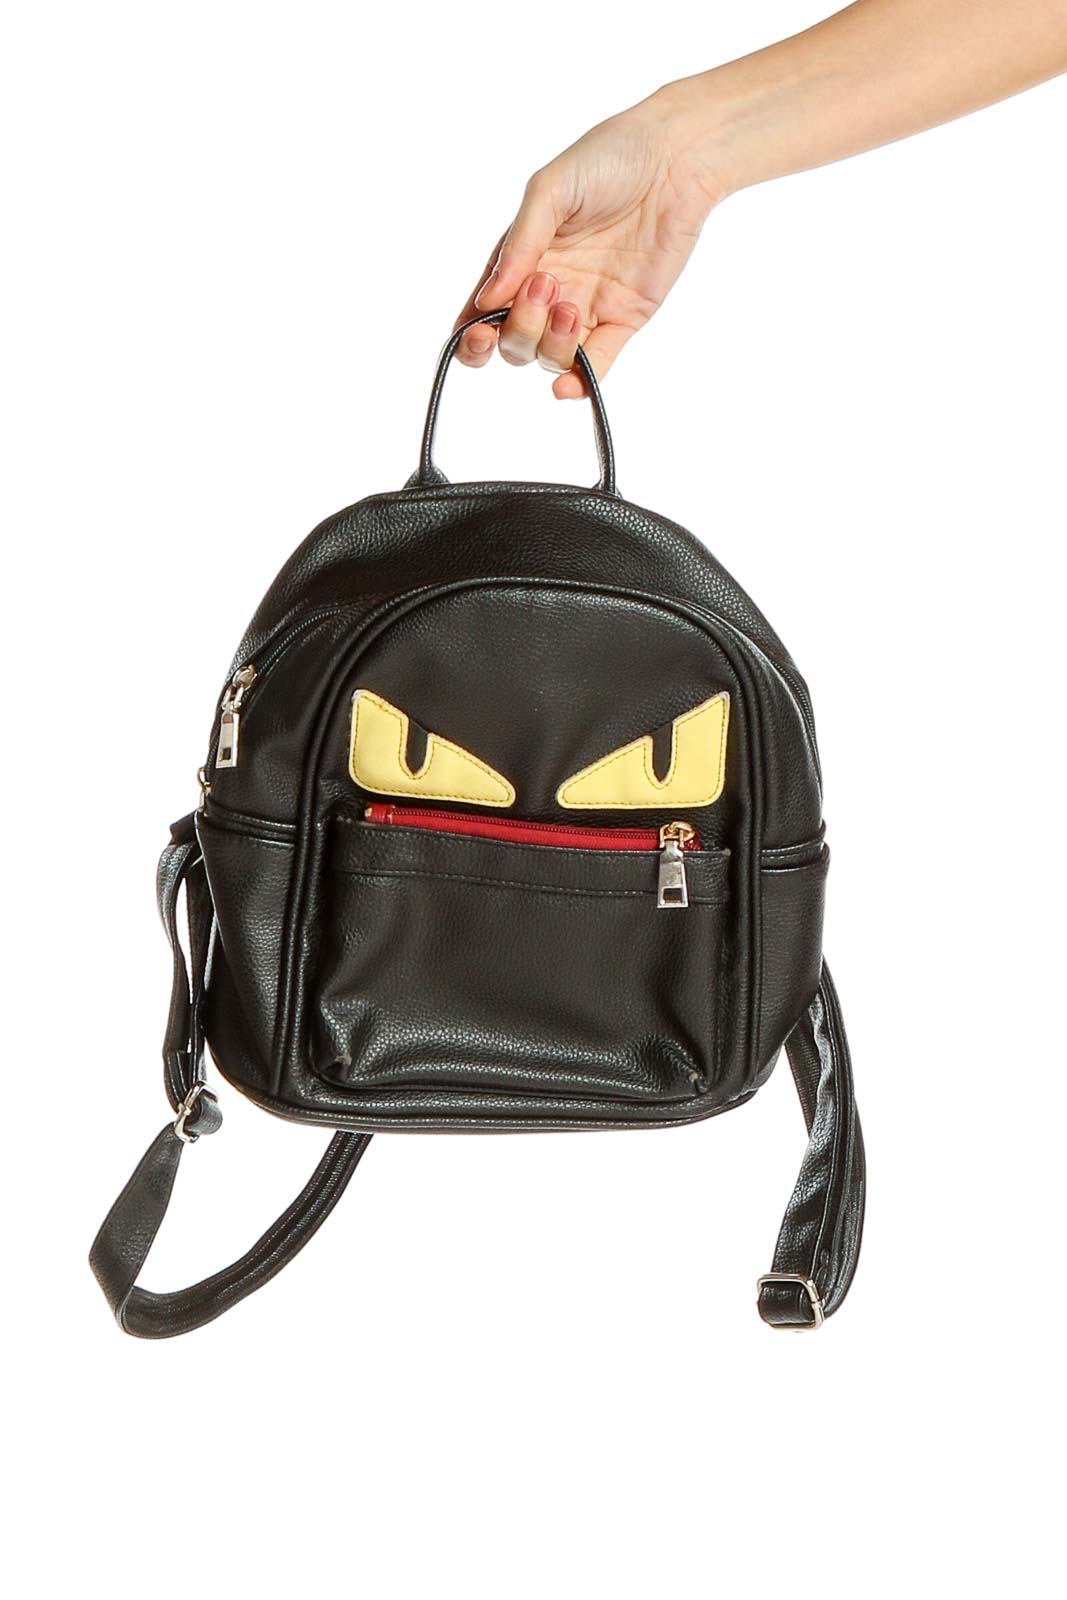 Black Leather Graphic Backpack Front